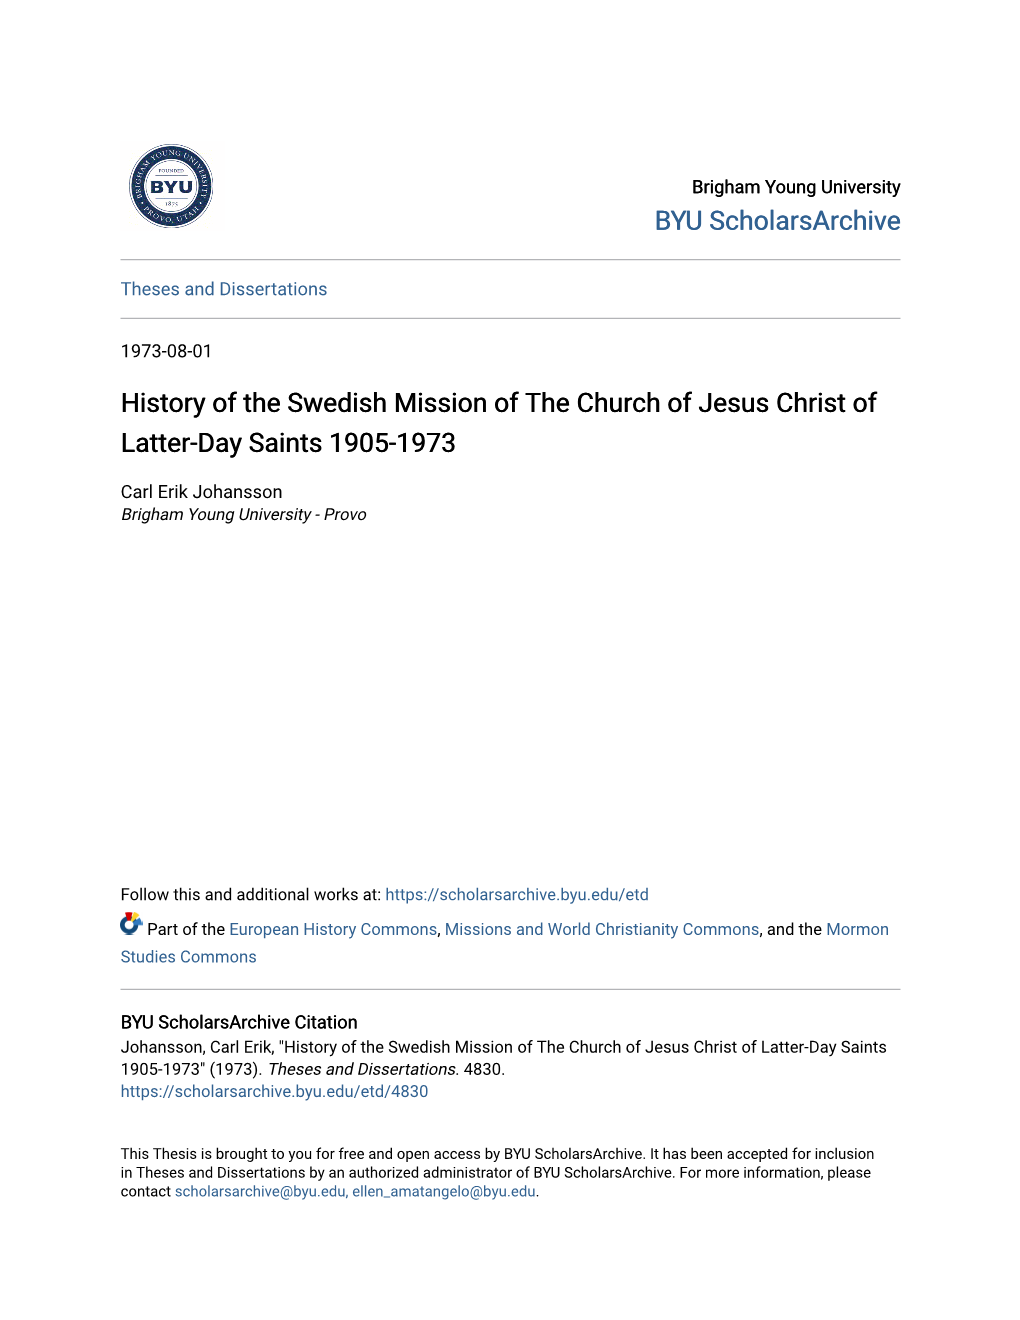 History of the Swedish Mission of the Church of Jesus Christ of Latter-Day Saints 1905-1973